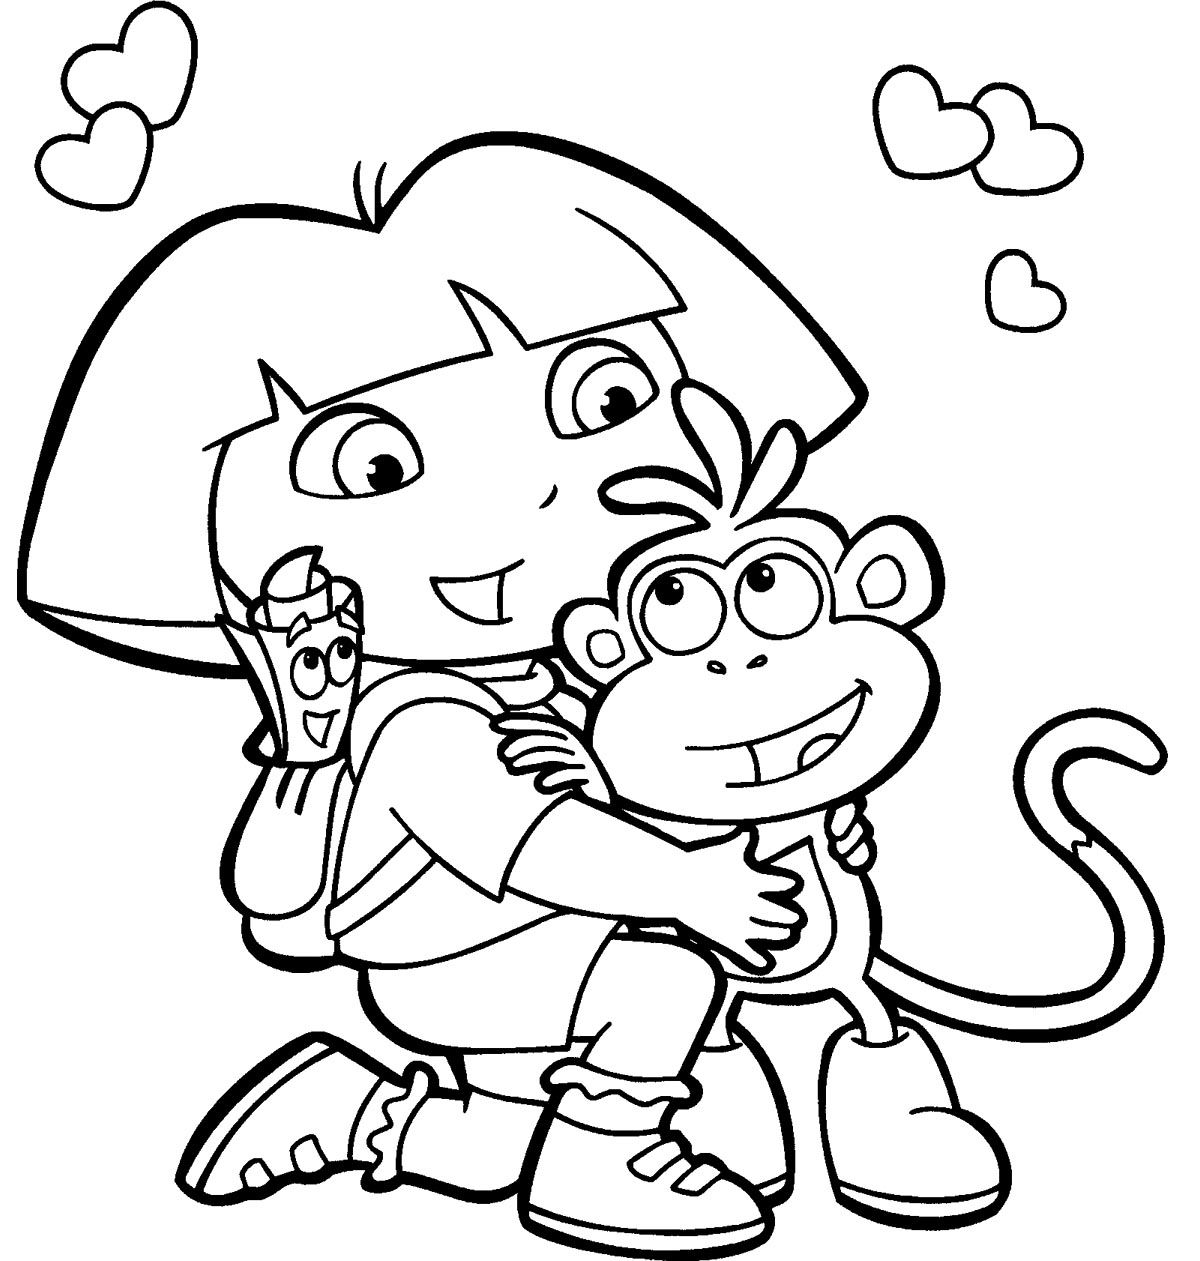 dora printable coloring pages free dora colouring sheets pdf printable dora and friends free dora pages printable coloring 